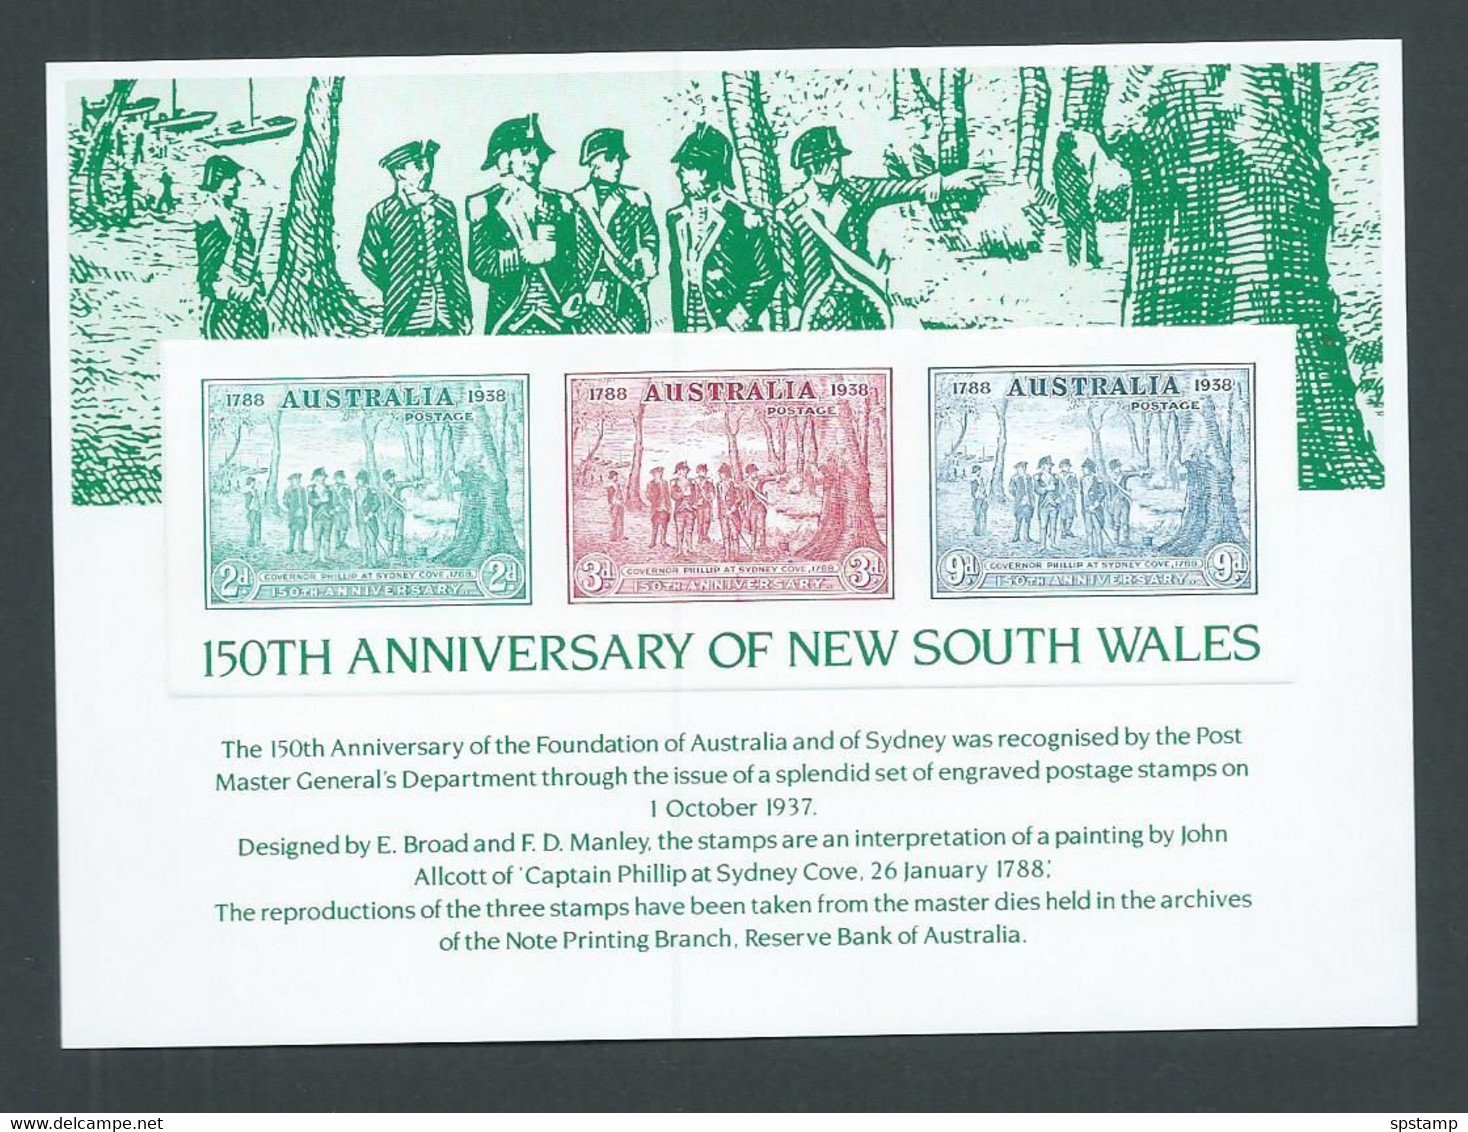 Australia 1989 NSW Sesquicentenary 1937 Issue Proof Reprints On Official APO Replica Card 15 - Proofs & Reprints